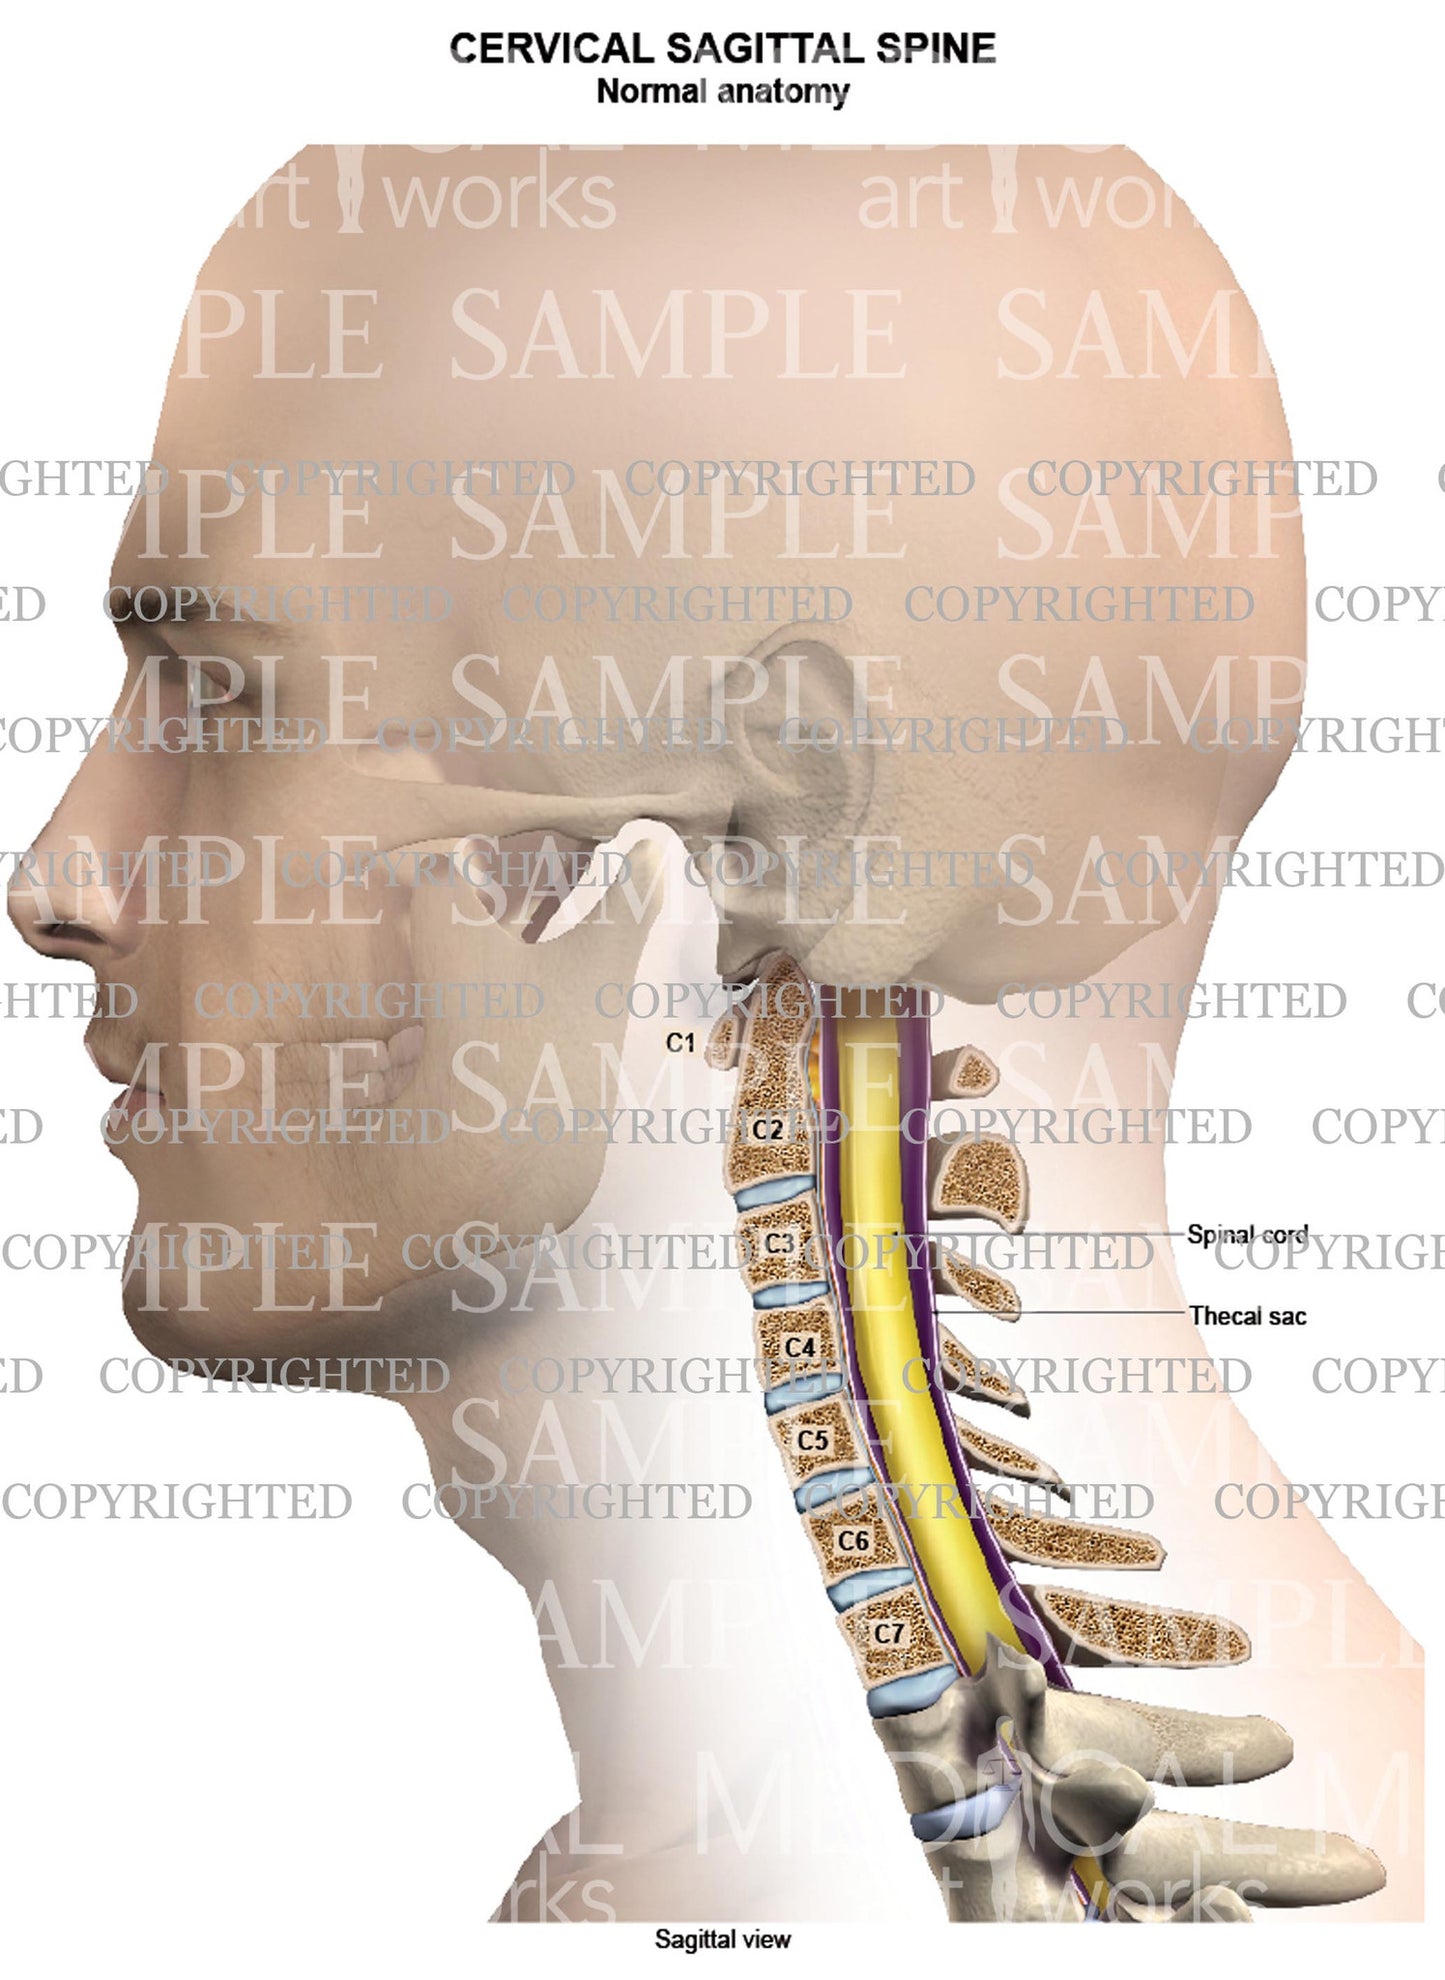 Cervical spine normal anatomy - sagittal view - Male